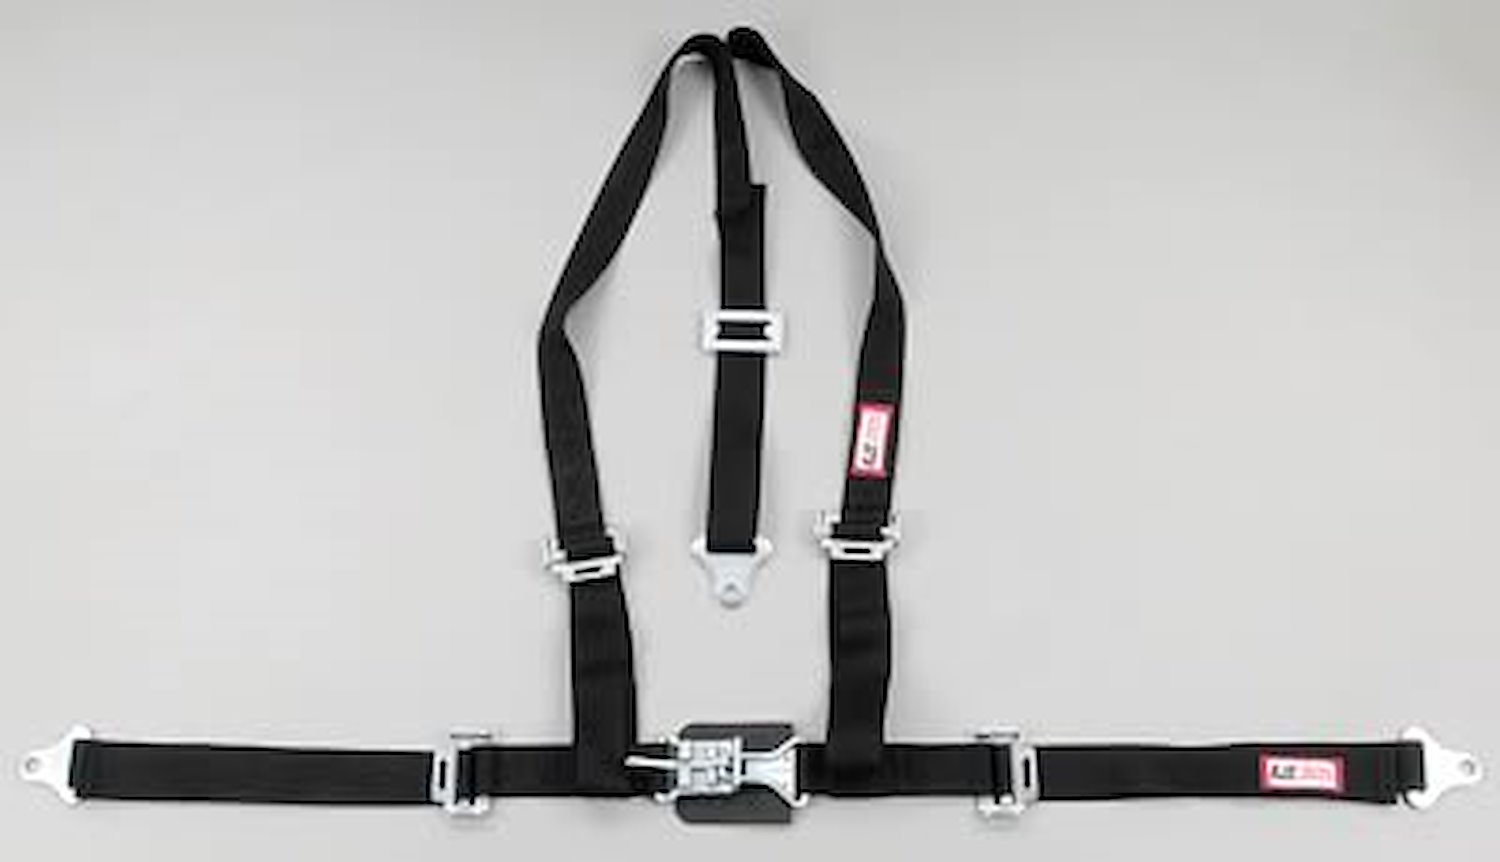 NON-SFI L&L HARNESS 2 PULL UP Lap Belt SEWN IN 2 S.H. V ROLL BAR Mount ALL SNAP ENDS BLUE